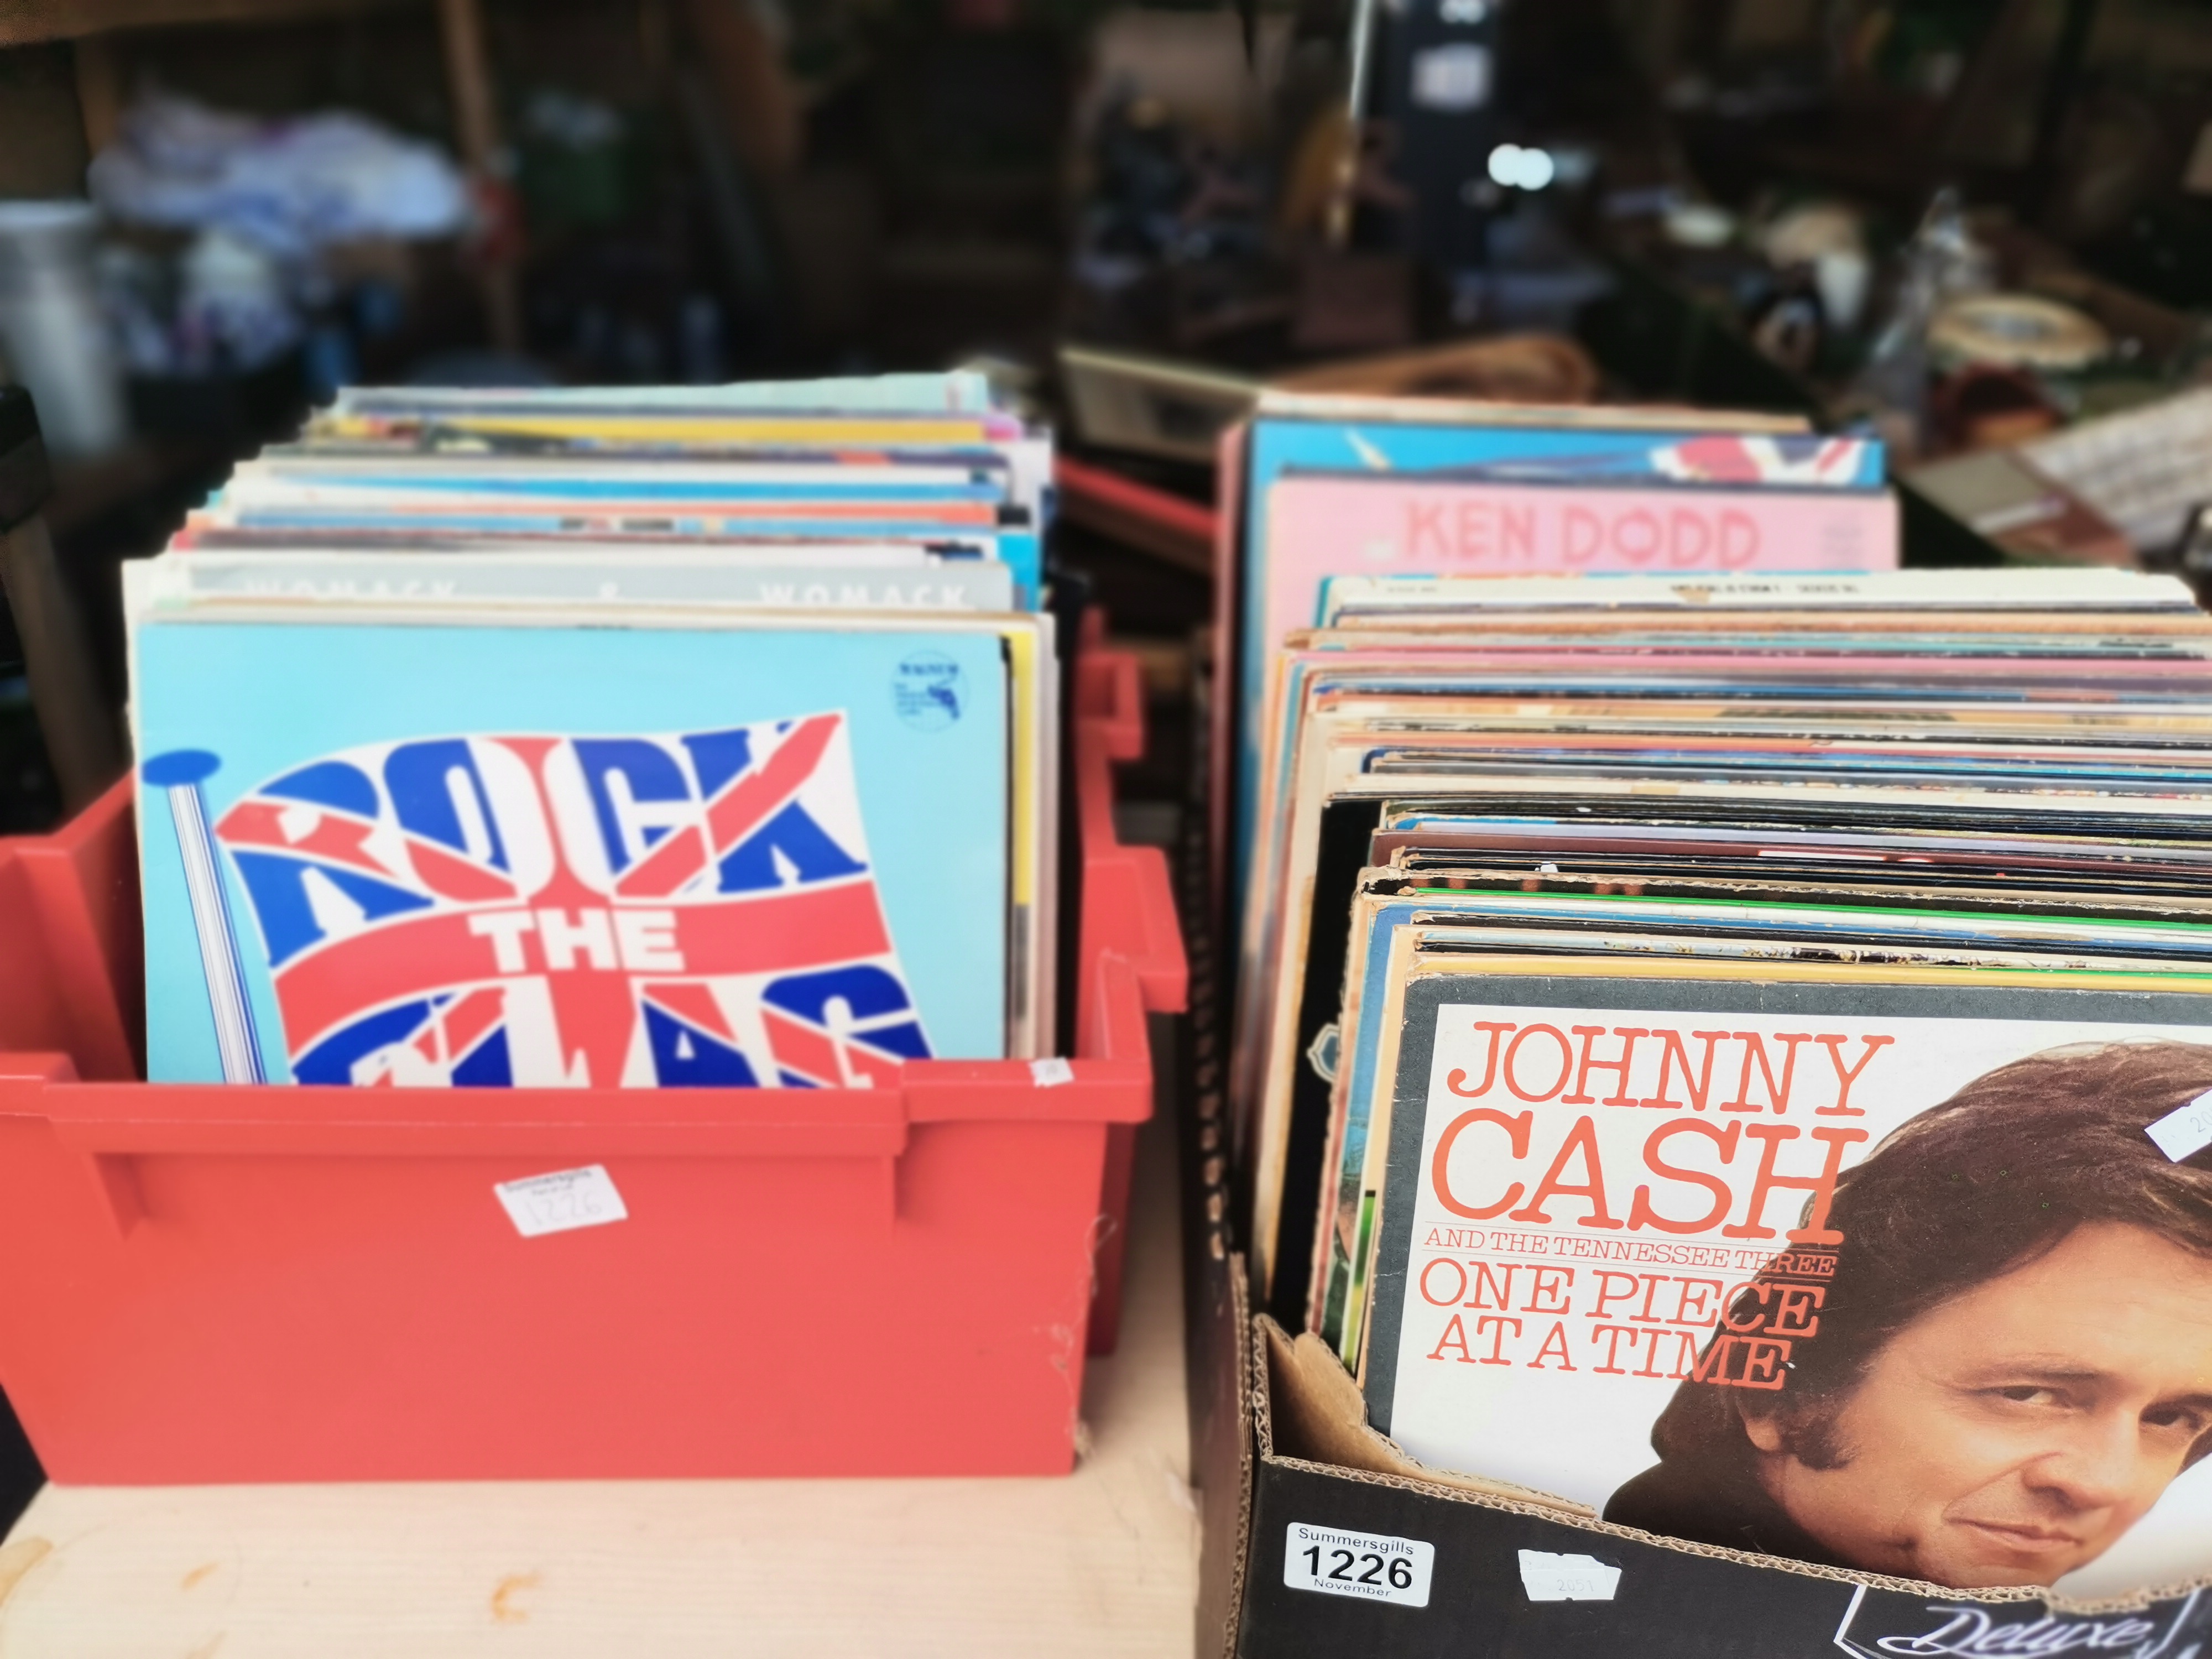 2 x Boxes of 12" LP records incl Johnny Cash, The Seekers, Ken Dodd, etc